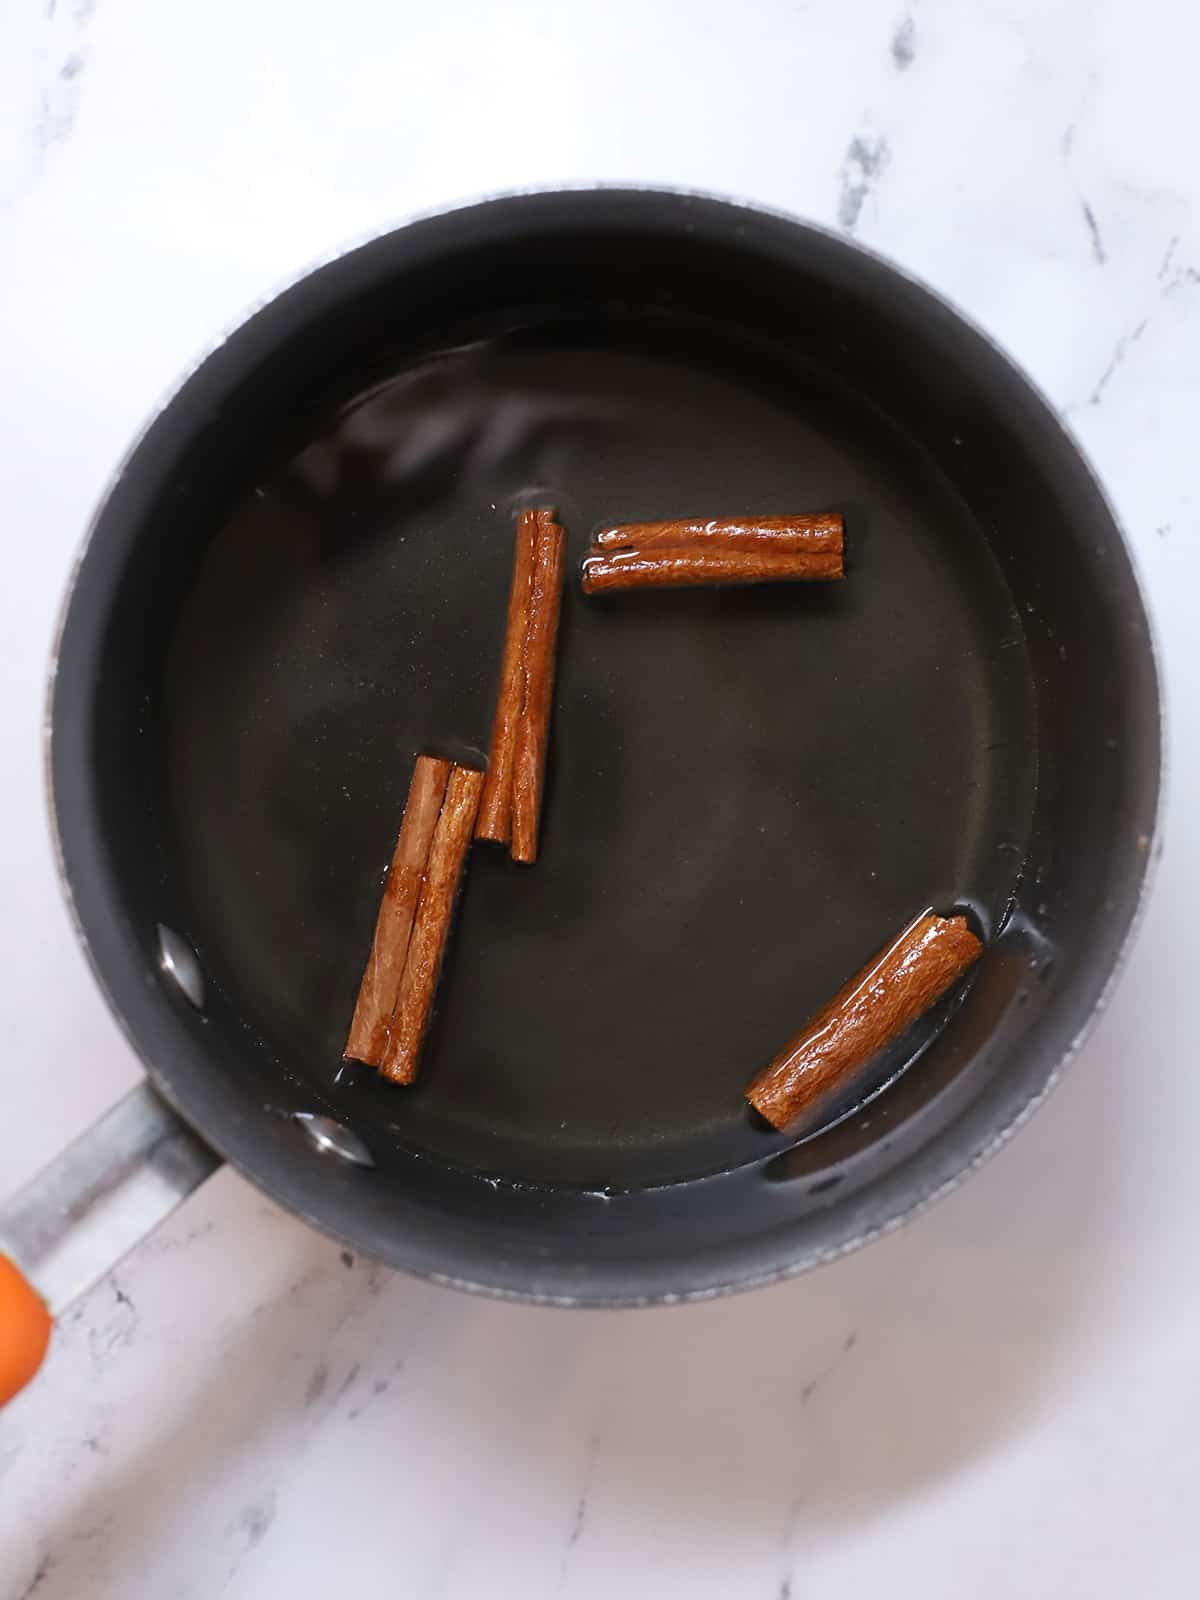 Cinnamon sticks in a pot of hot simple syrup.